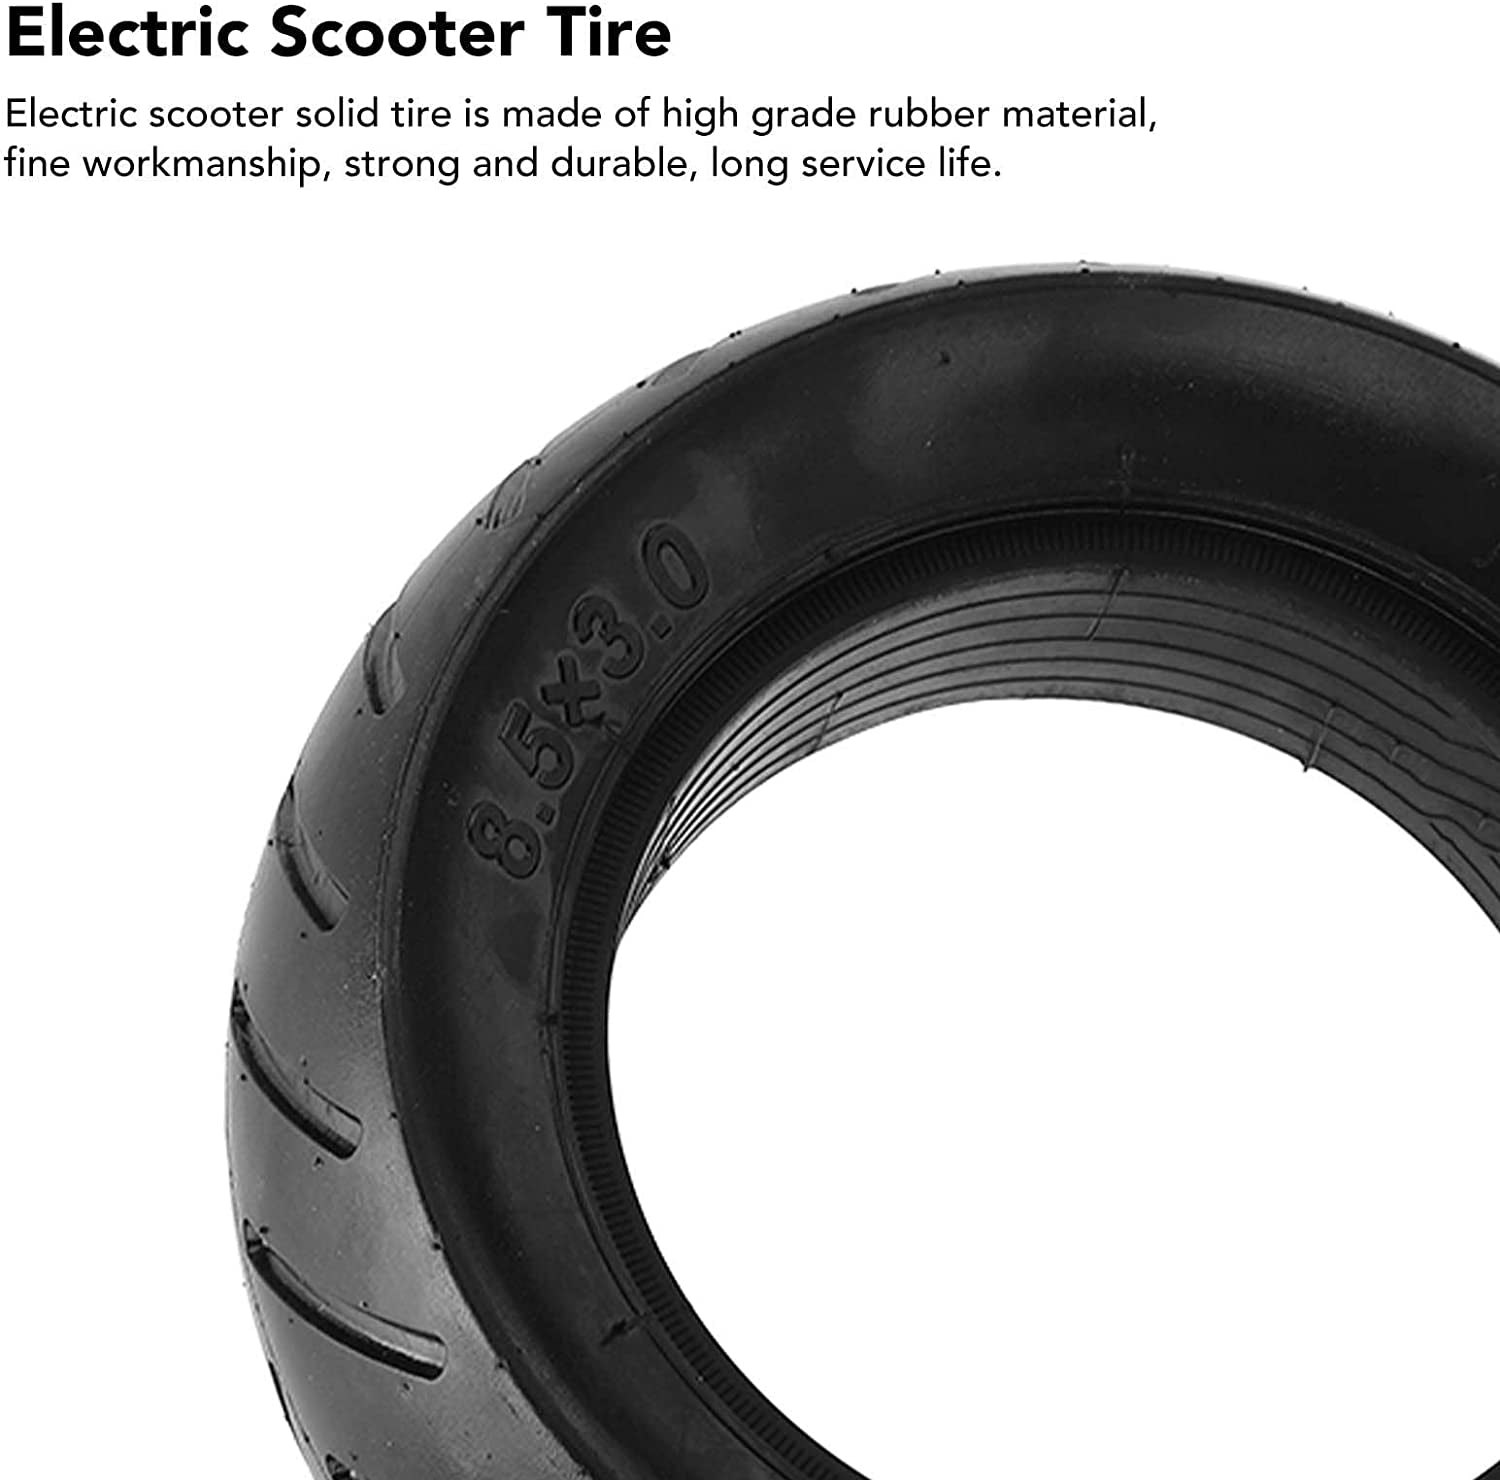 explosion-proof 8.5 inch tyre 8.5x3.0 solid